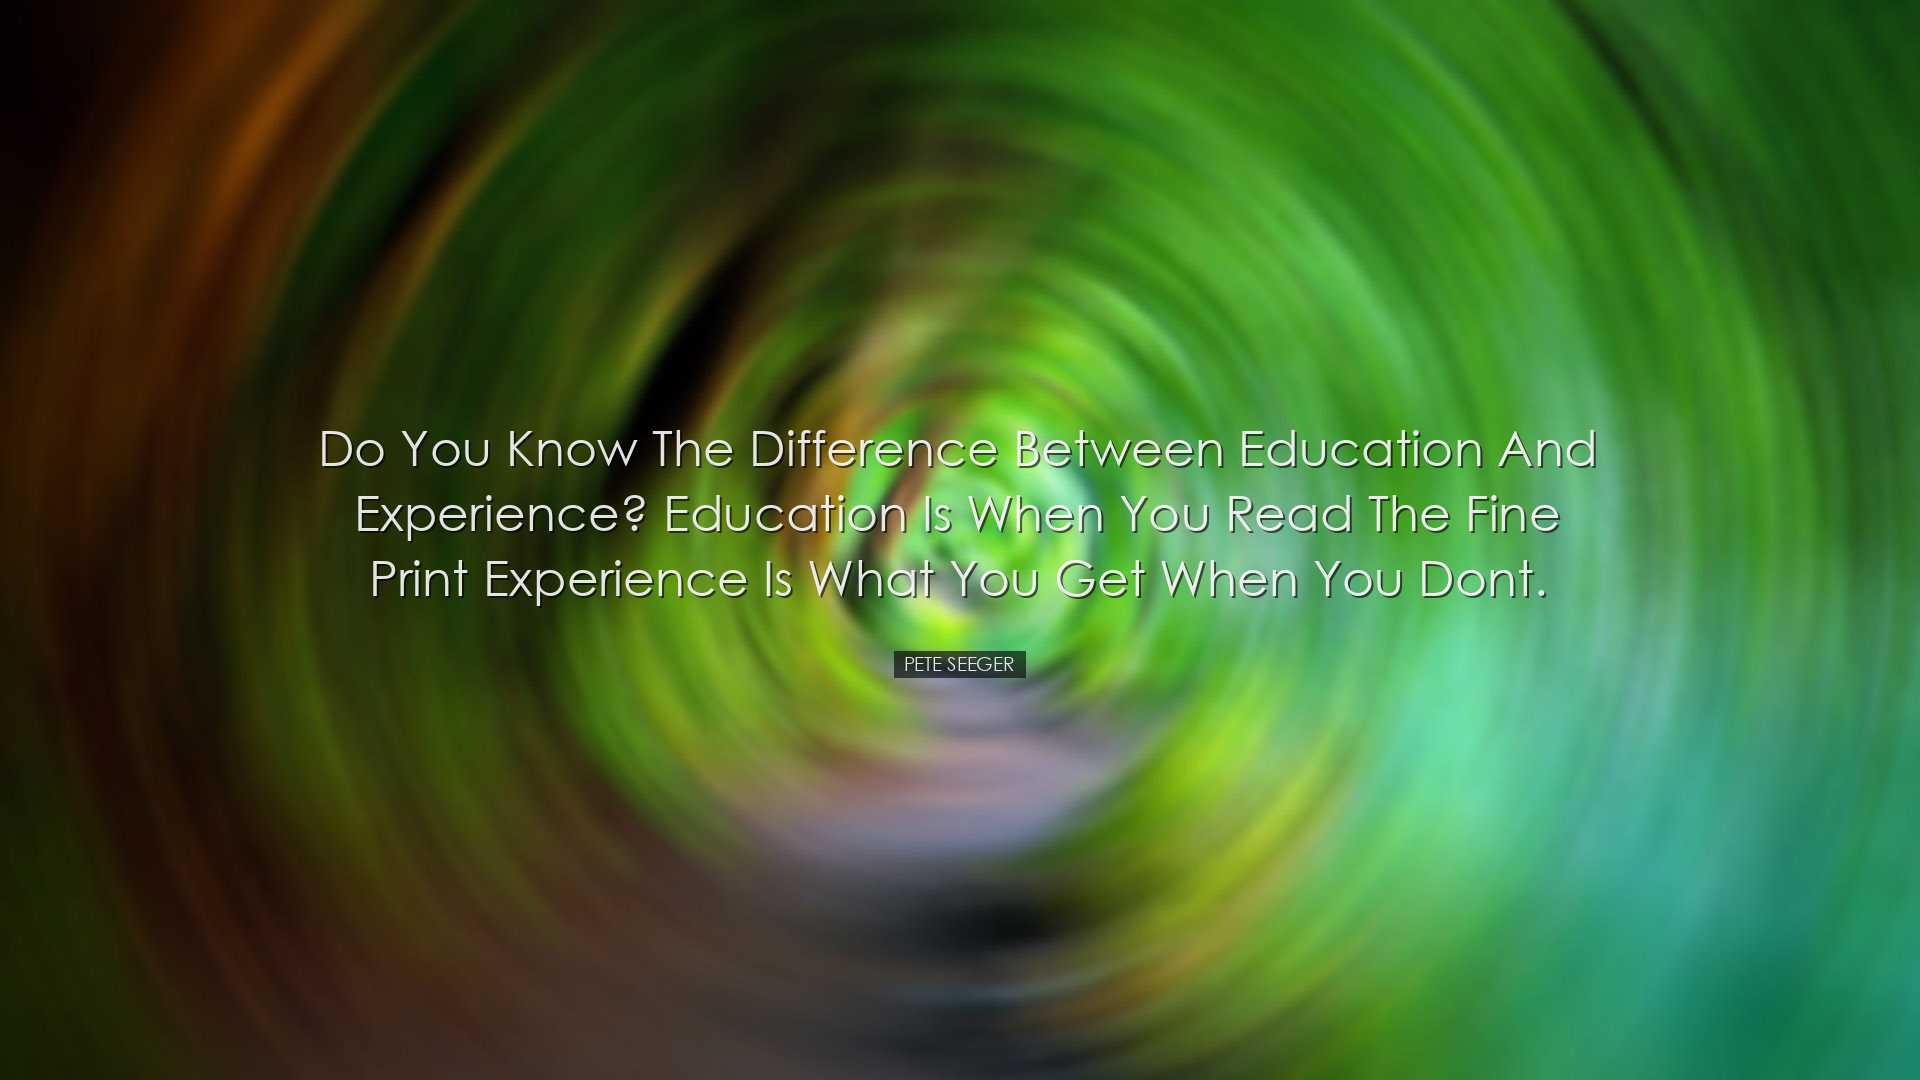 Do you know the difference between education and experience? Educa